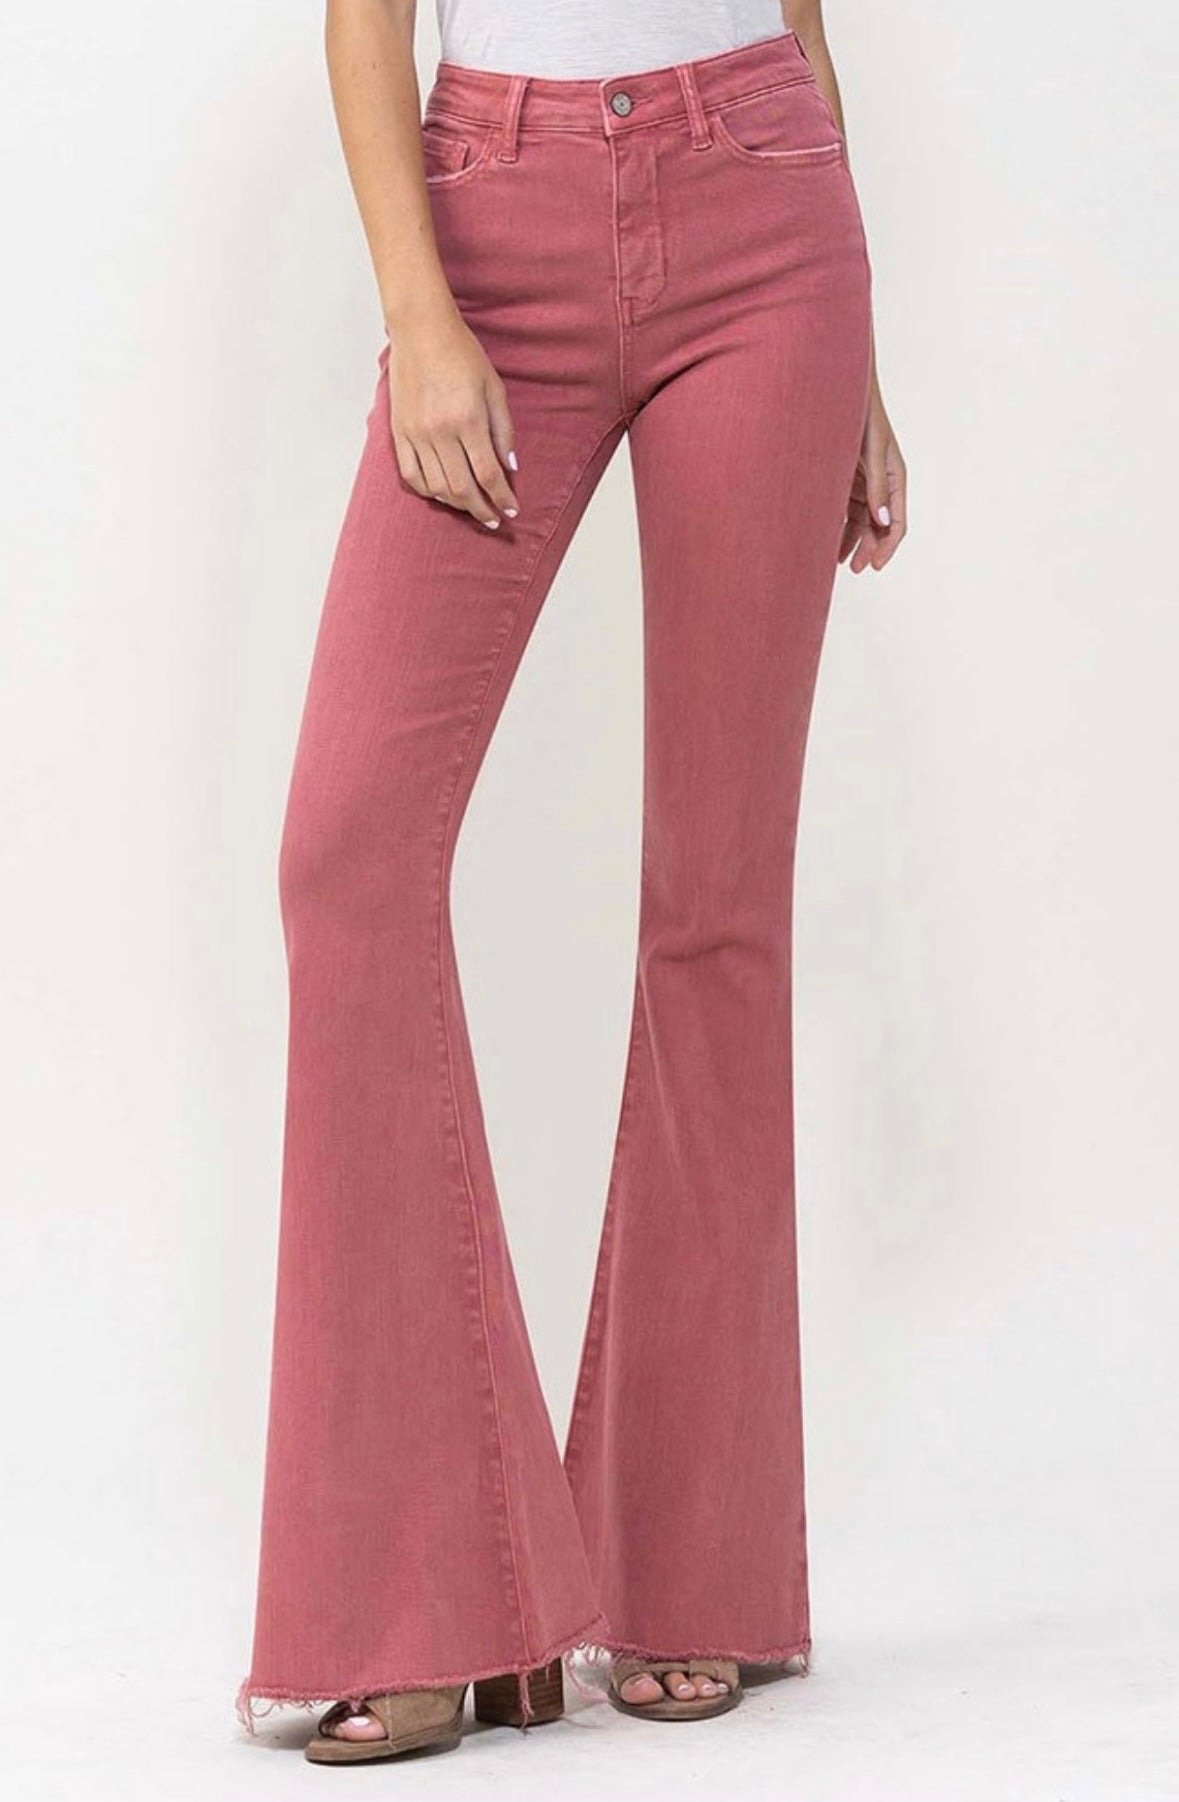 The Autumn Jeans: High Rise Burnt Red Flare Jeans